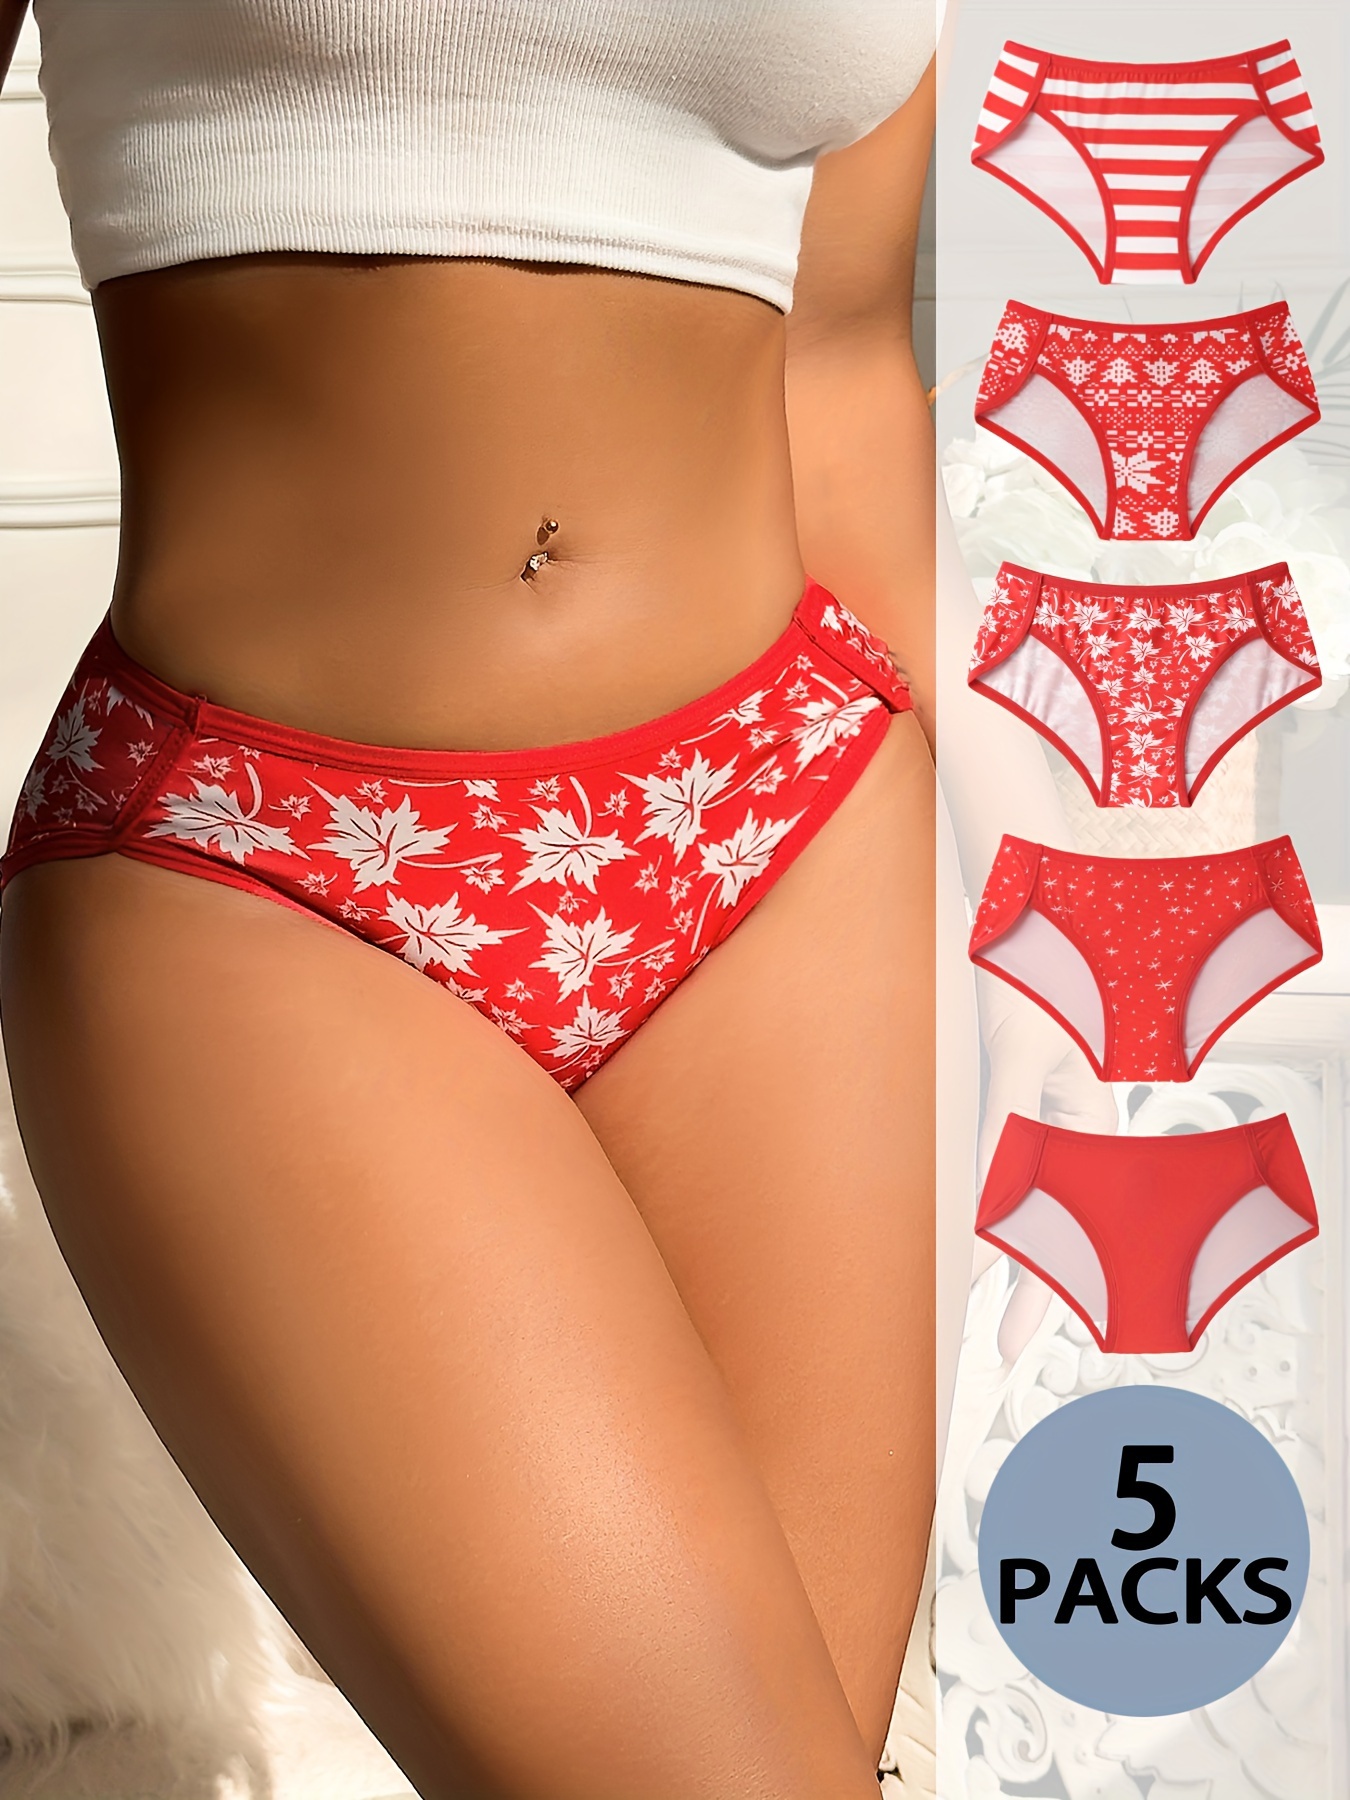 5pcs Butterfly & Geometric Print Period Panties, Comfy & Breathable  Stretchy Intimates Panties, Women's Lingerie & Underwear